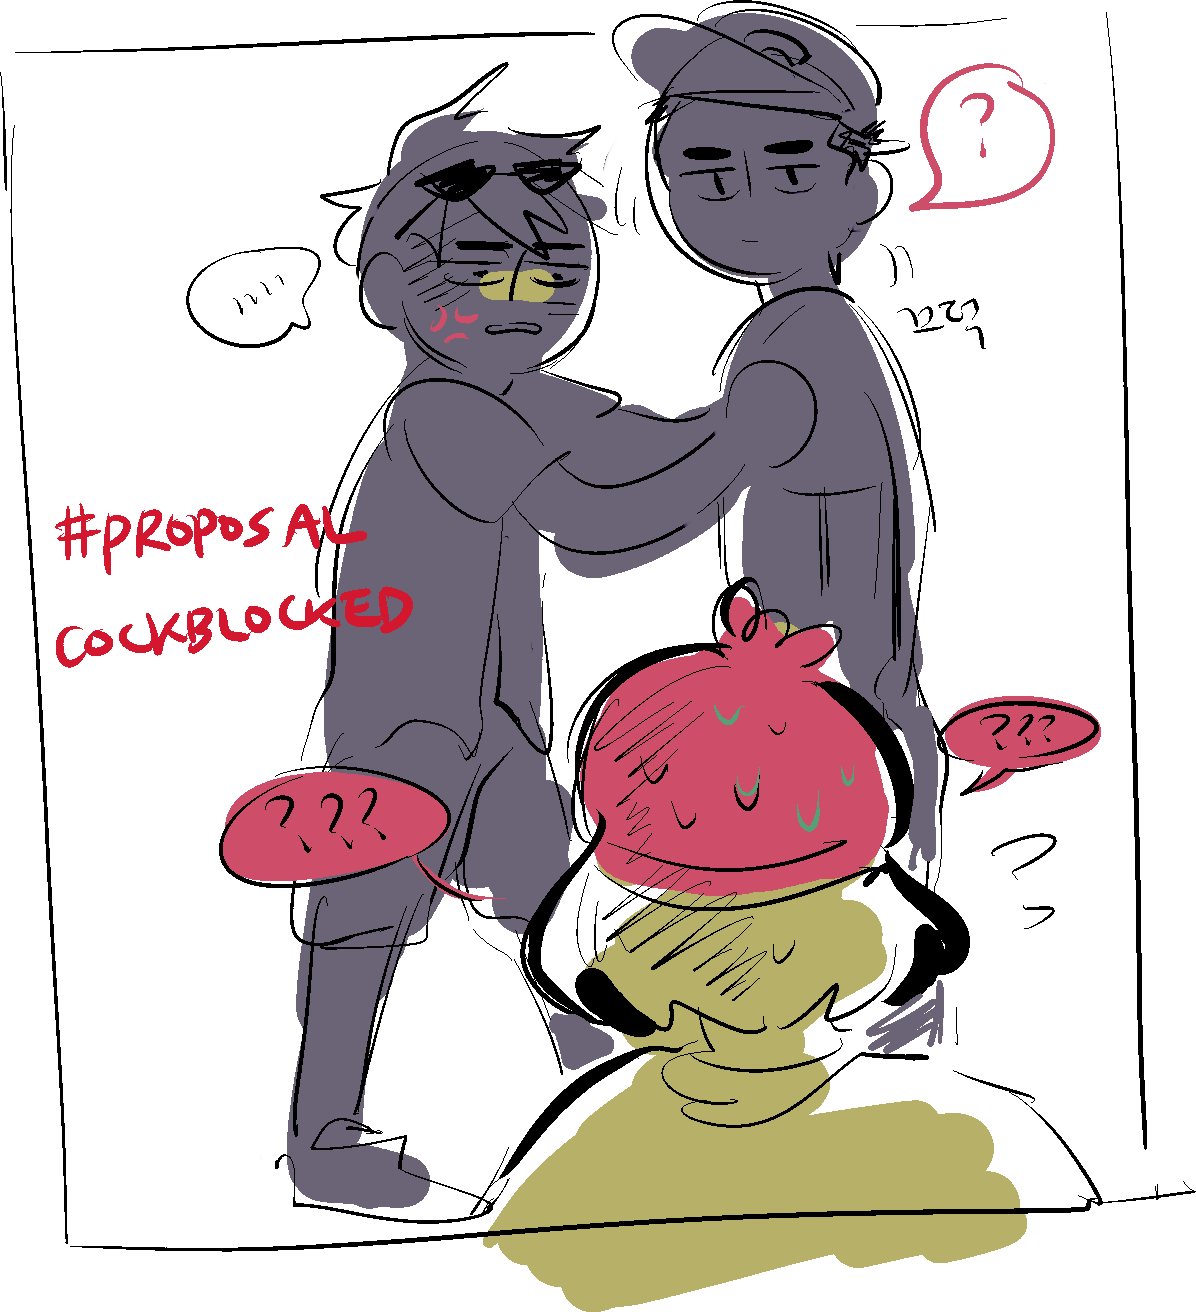 yahoberries: based on ectoviolet’s hc where instead of a honeymoon, blue initially